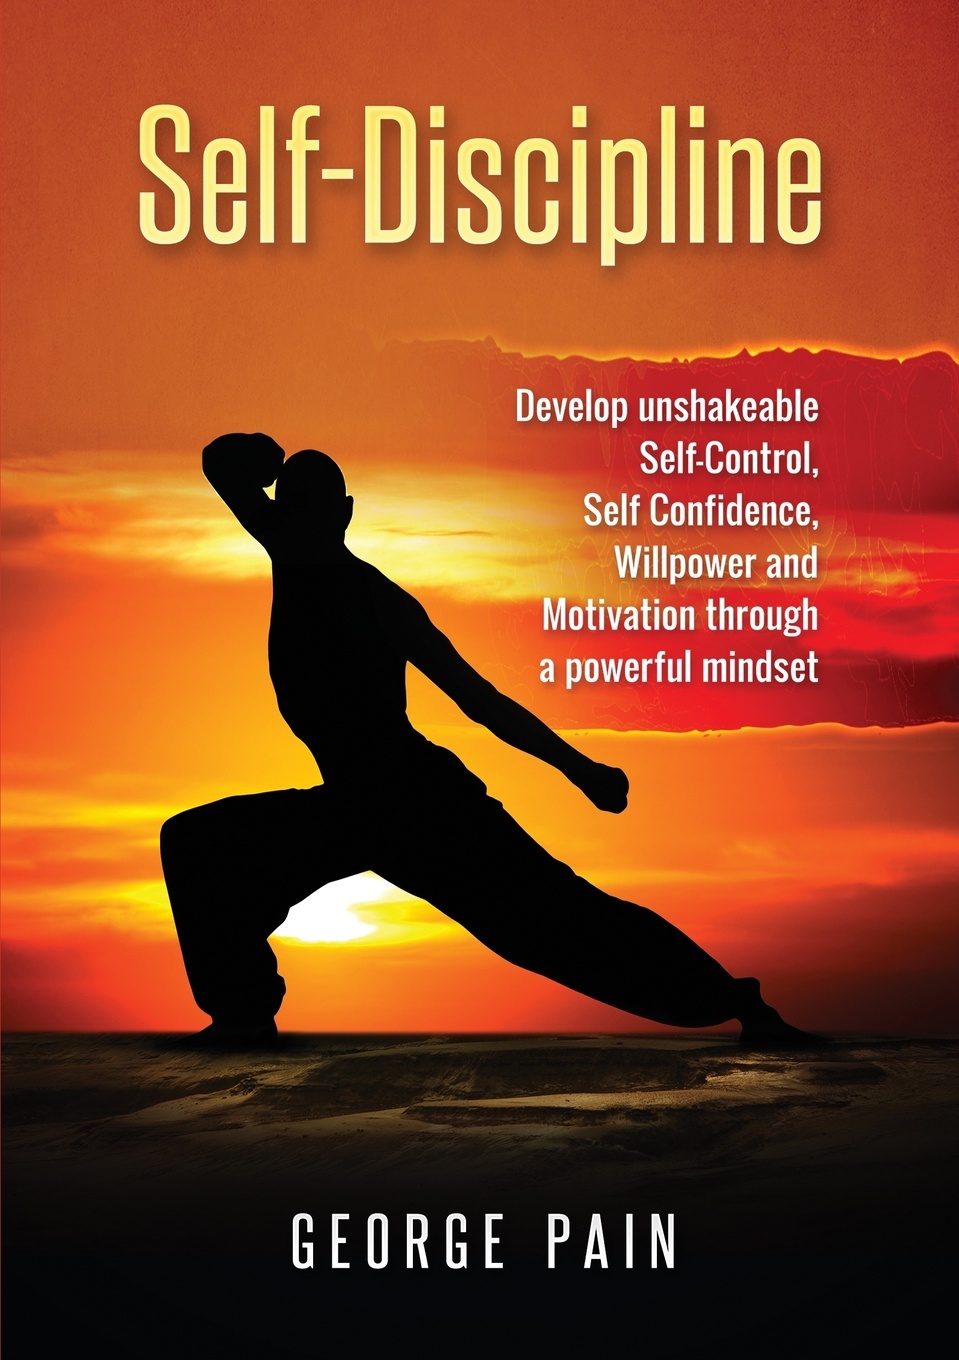 Self-Discipline. Develop unshakeable Self-Control, Self Confidence, Willpower and Motivation through a powerful mindset